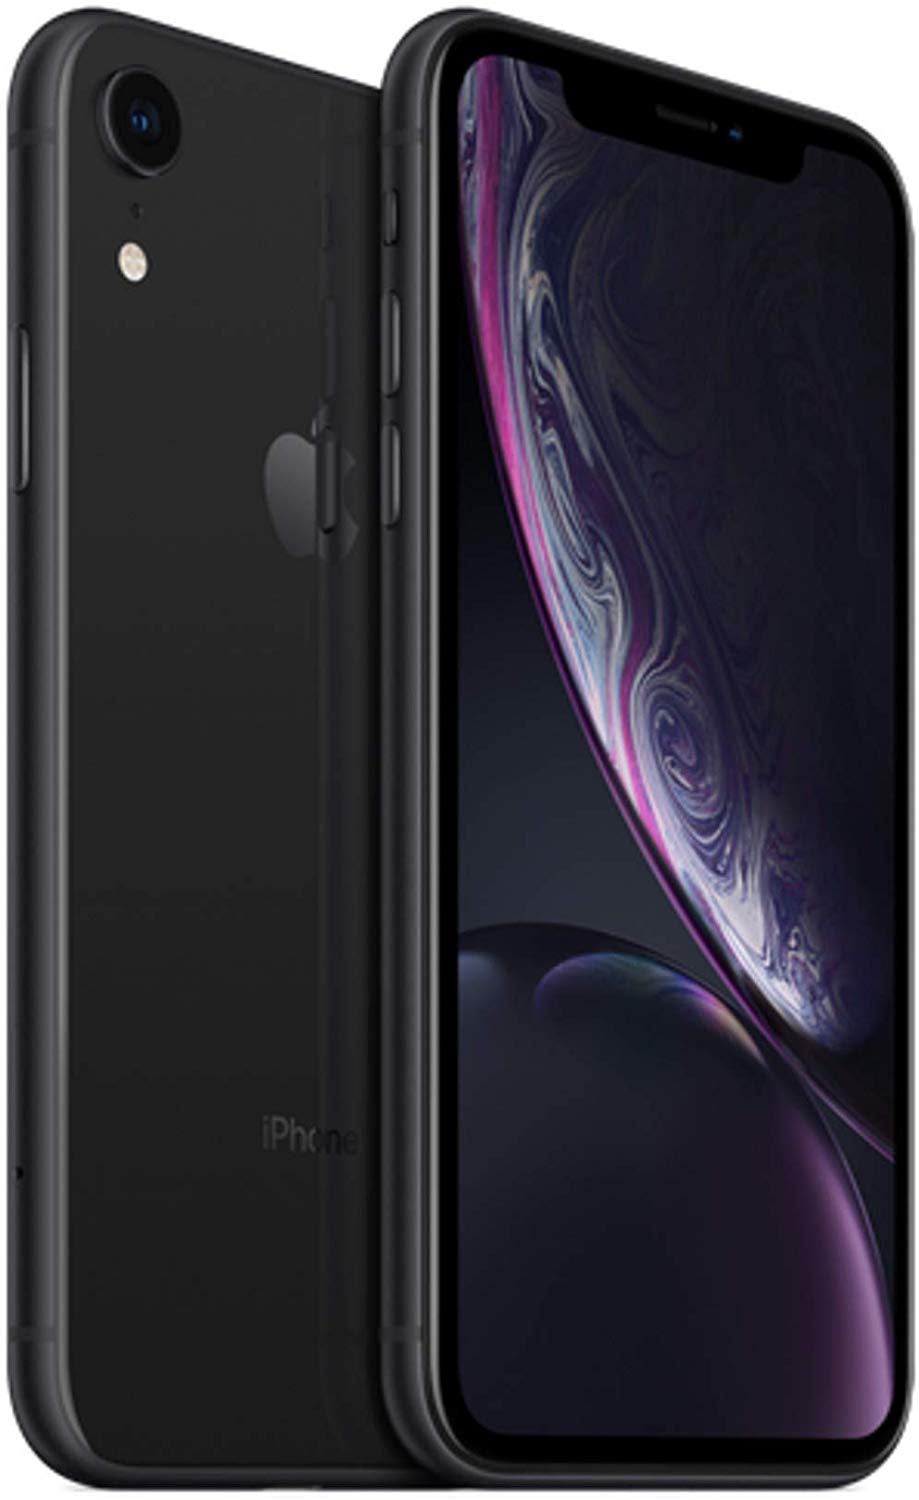 Review of Apple iPhone XR, 64GB, Black - Fully Unlocked